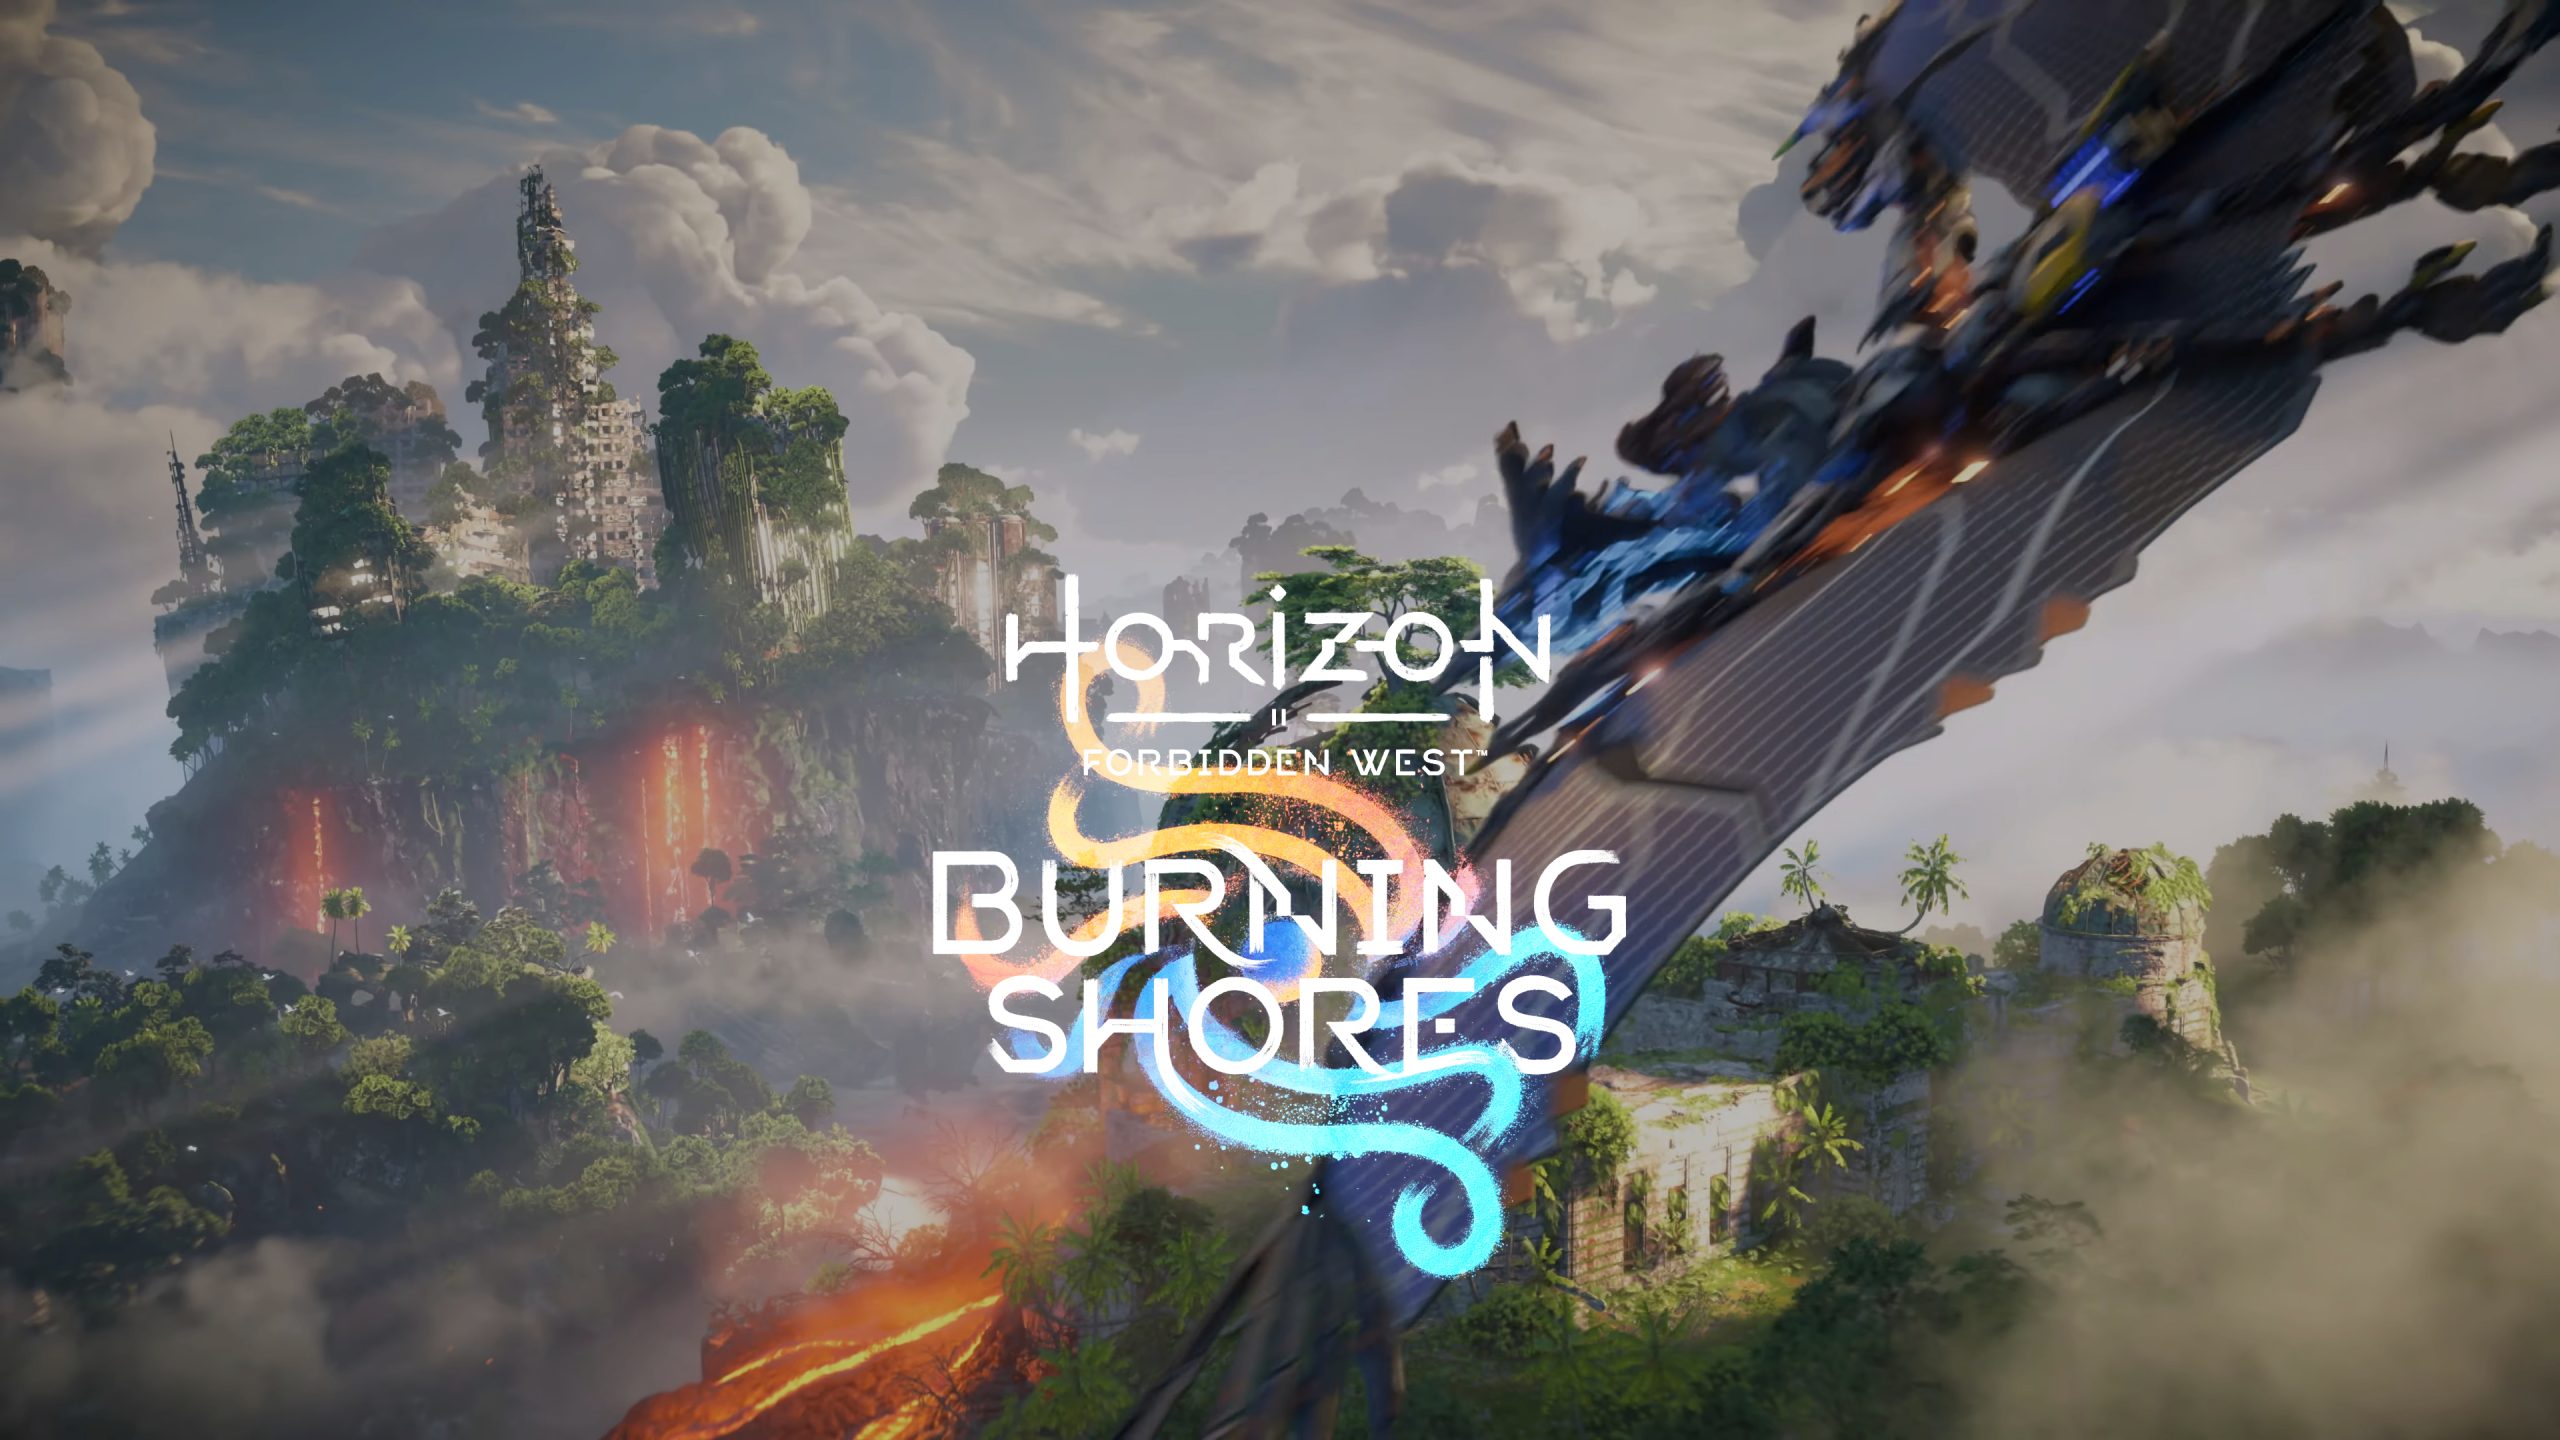 Horizon Forbidden West: Burning Shores is exclusive to PlayStation 5  because of its clouds